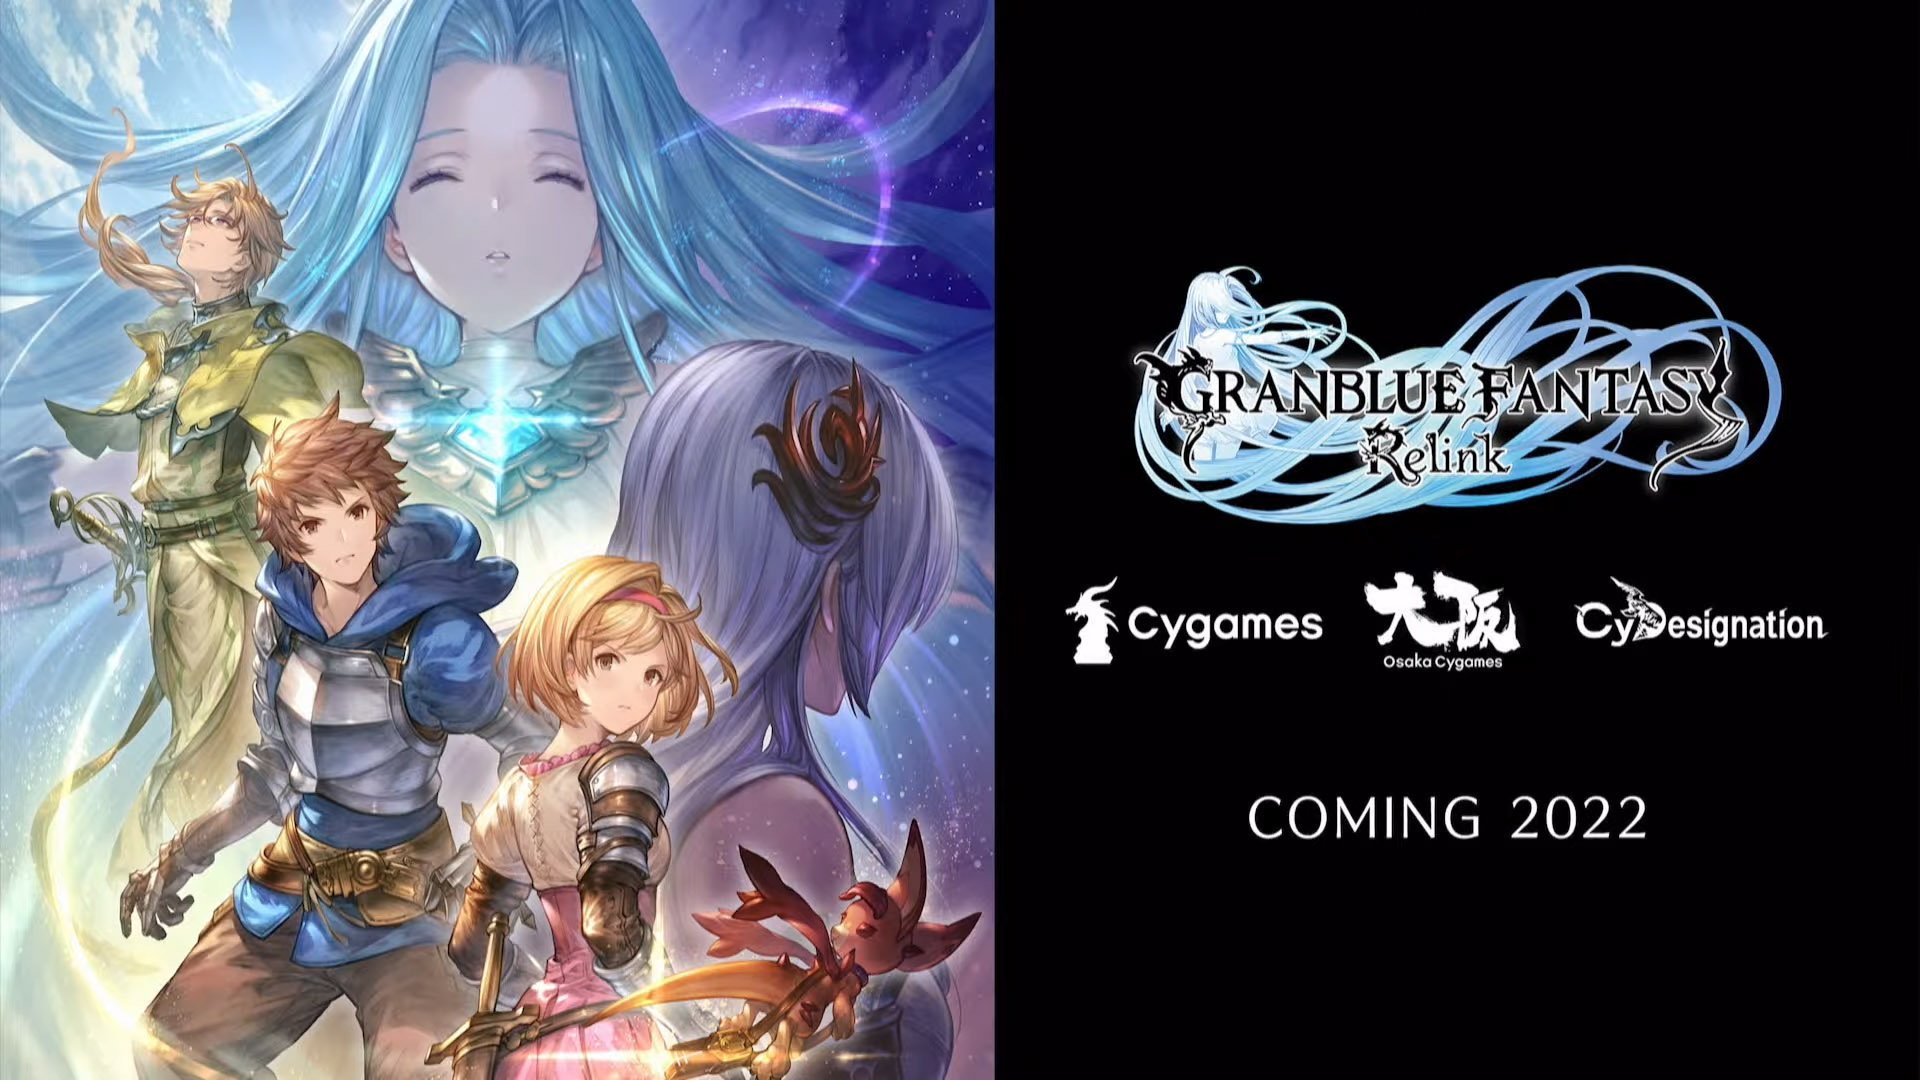 Granblue Fantasy: Relink coming to PS4 and PS5 in 2022